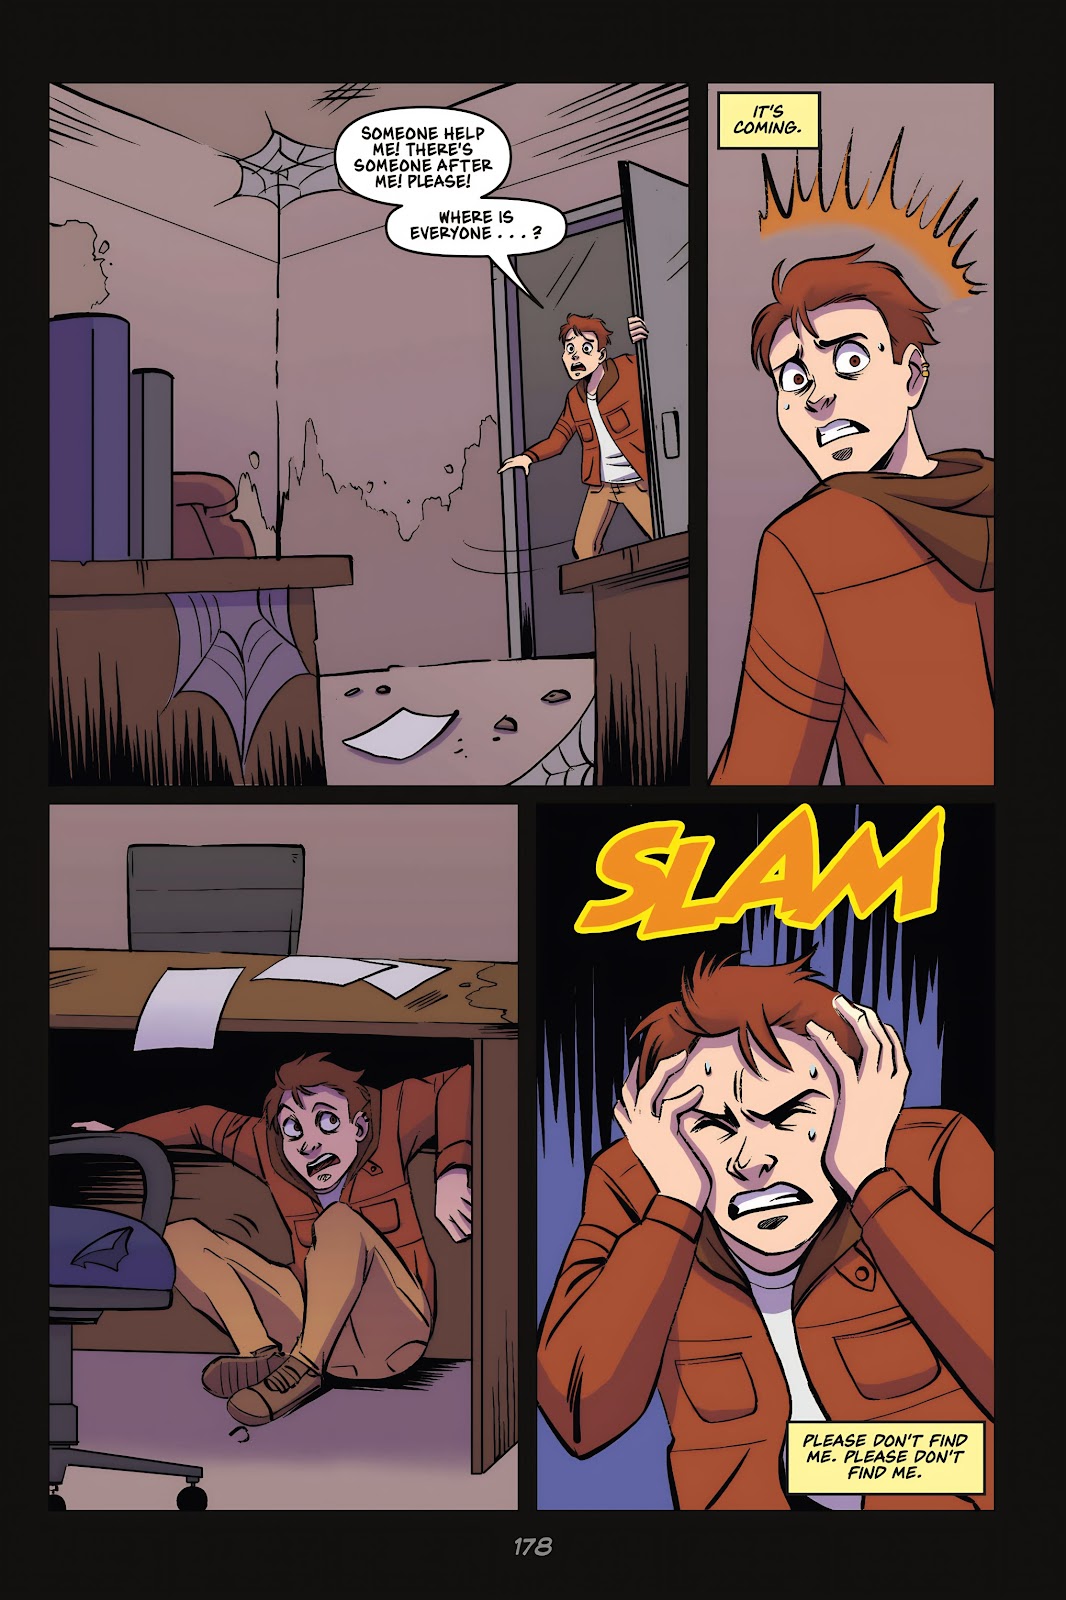 Five Nights at Freddy's: Fazbear Frights Graphic Novel Collection #TPB 3  (Part 2) - Read Five Nights at Freddy's: Fazbear Frights Graphic Novel  Collection Issue #TPB 3 (Part 2) Page 78